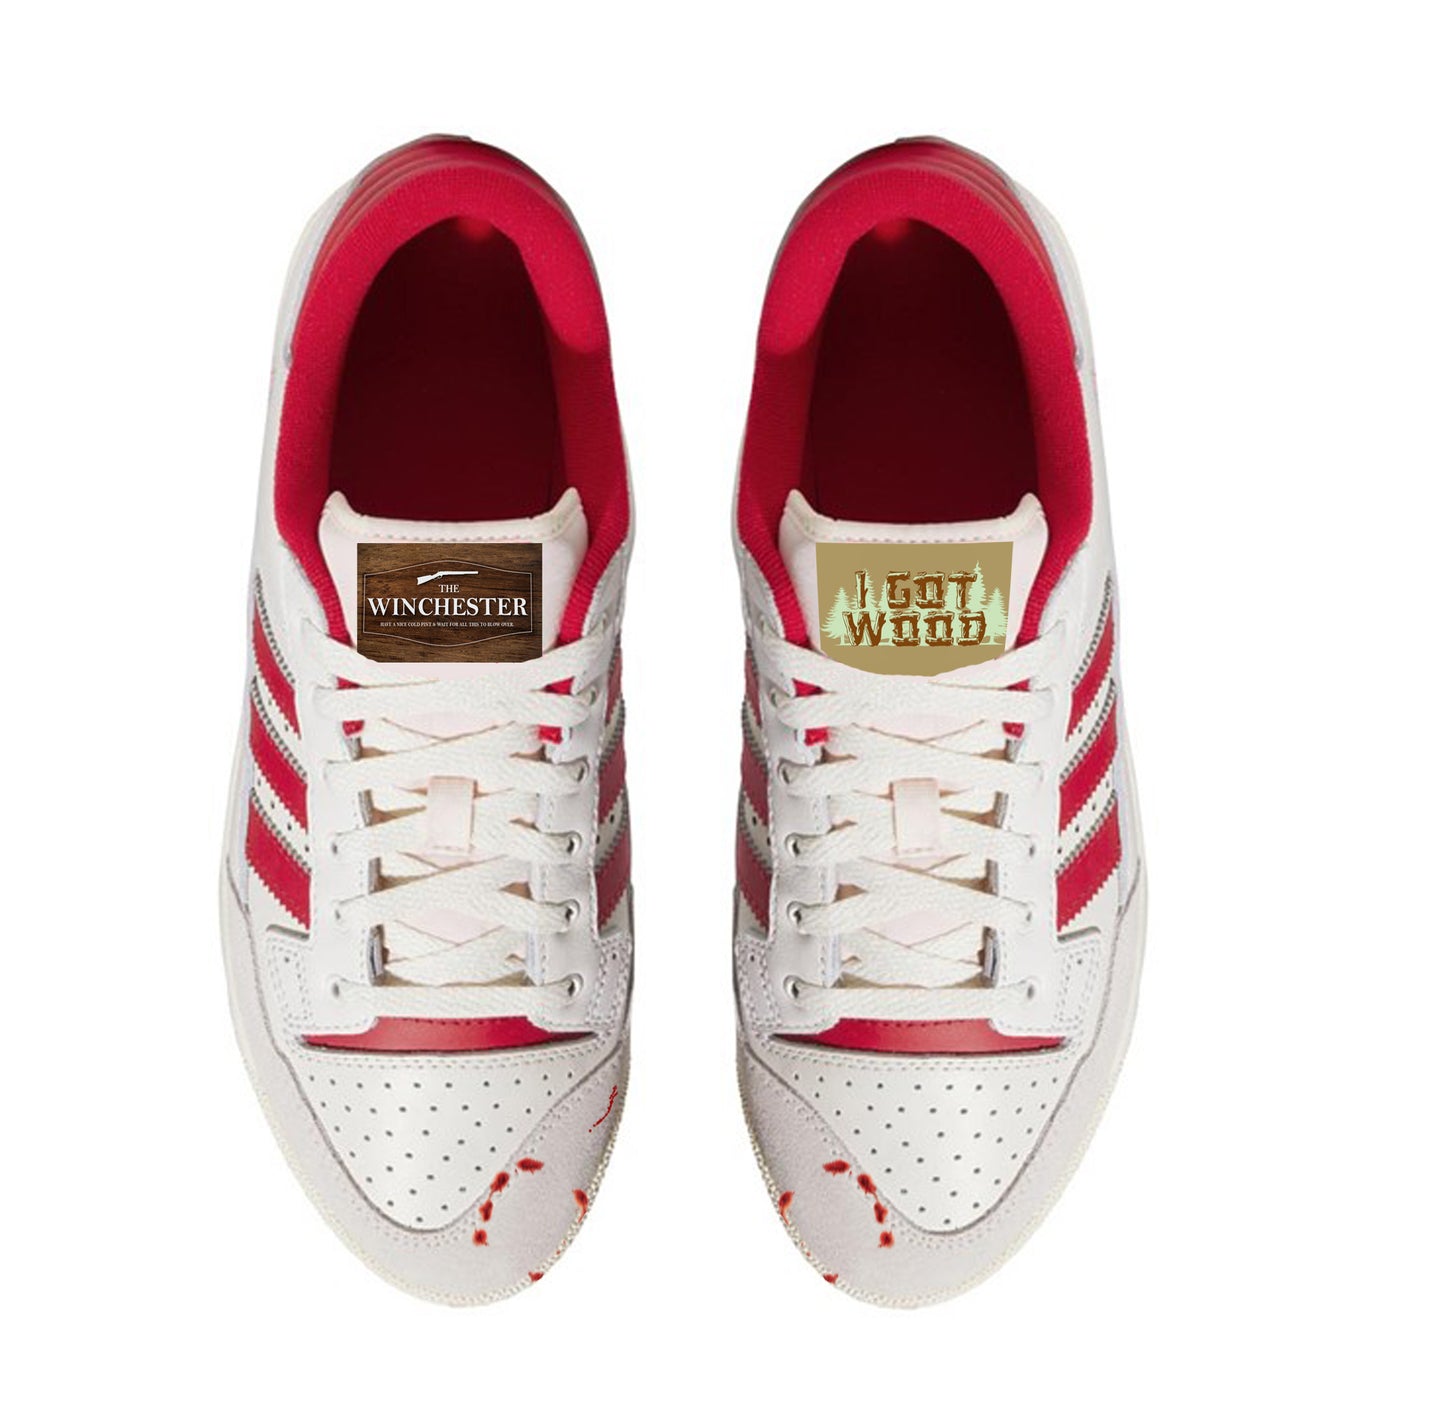 Limited edition Shaun of the dead white / red Adidas Centennial 85 Low trainers / sneakers